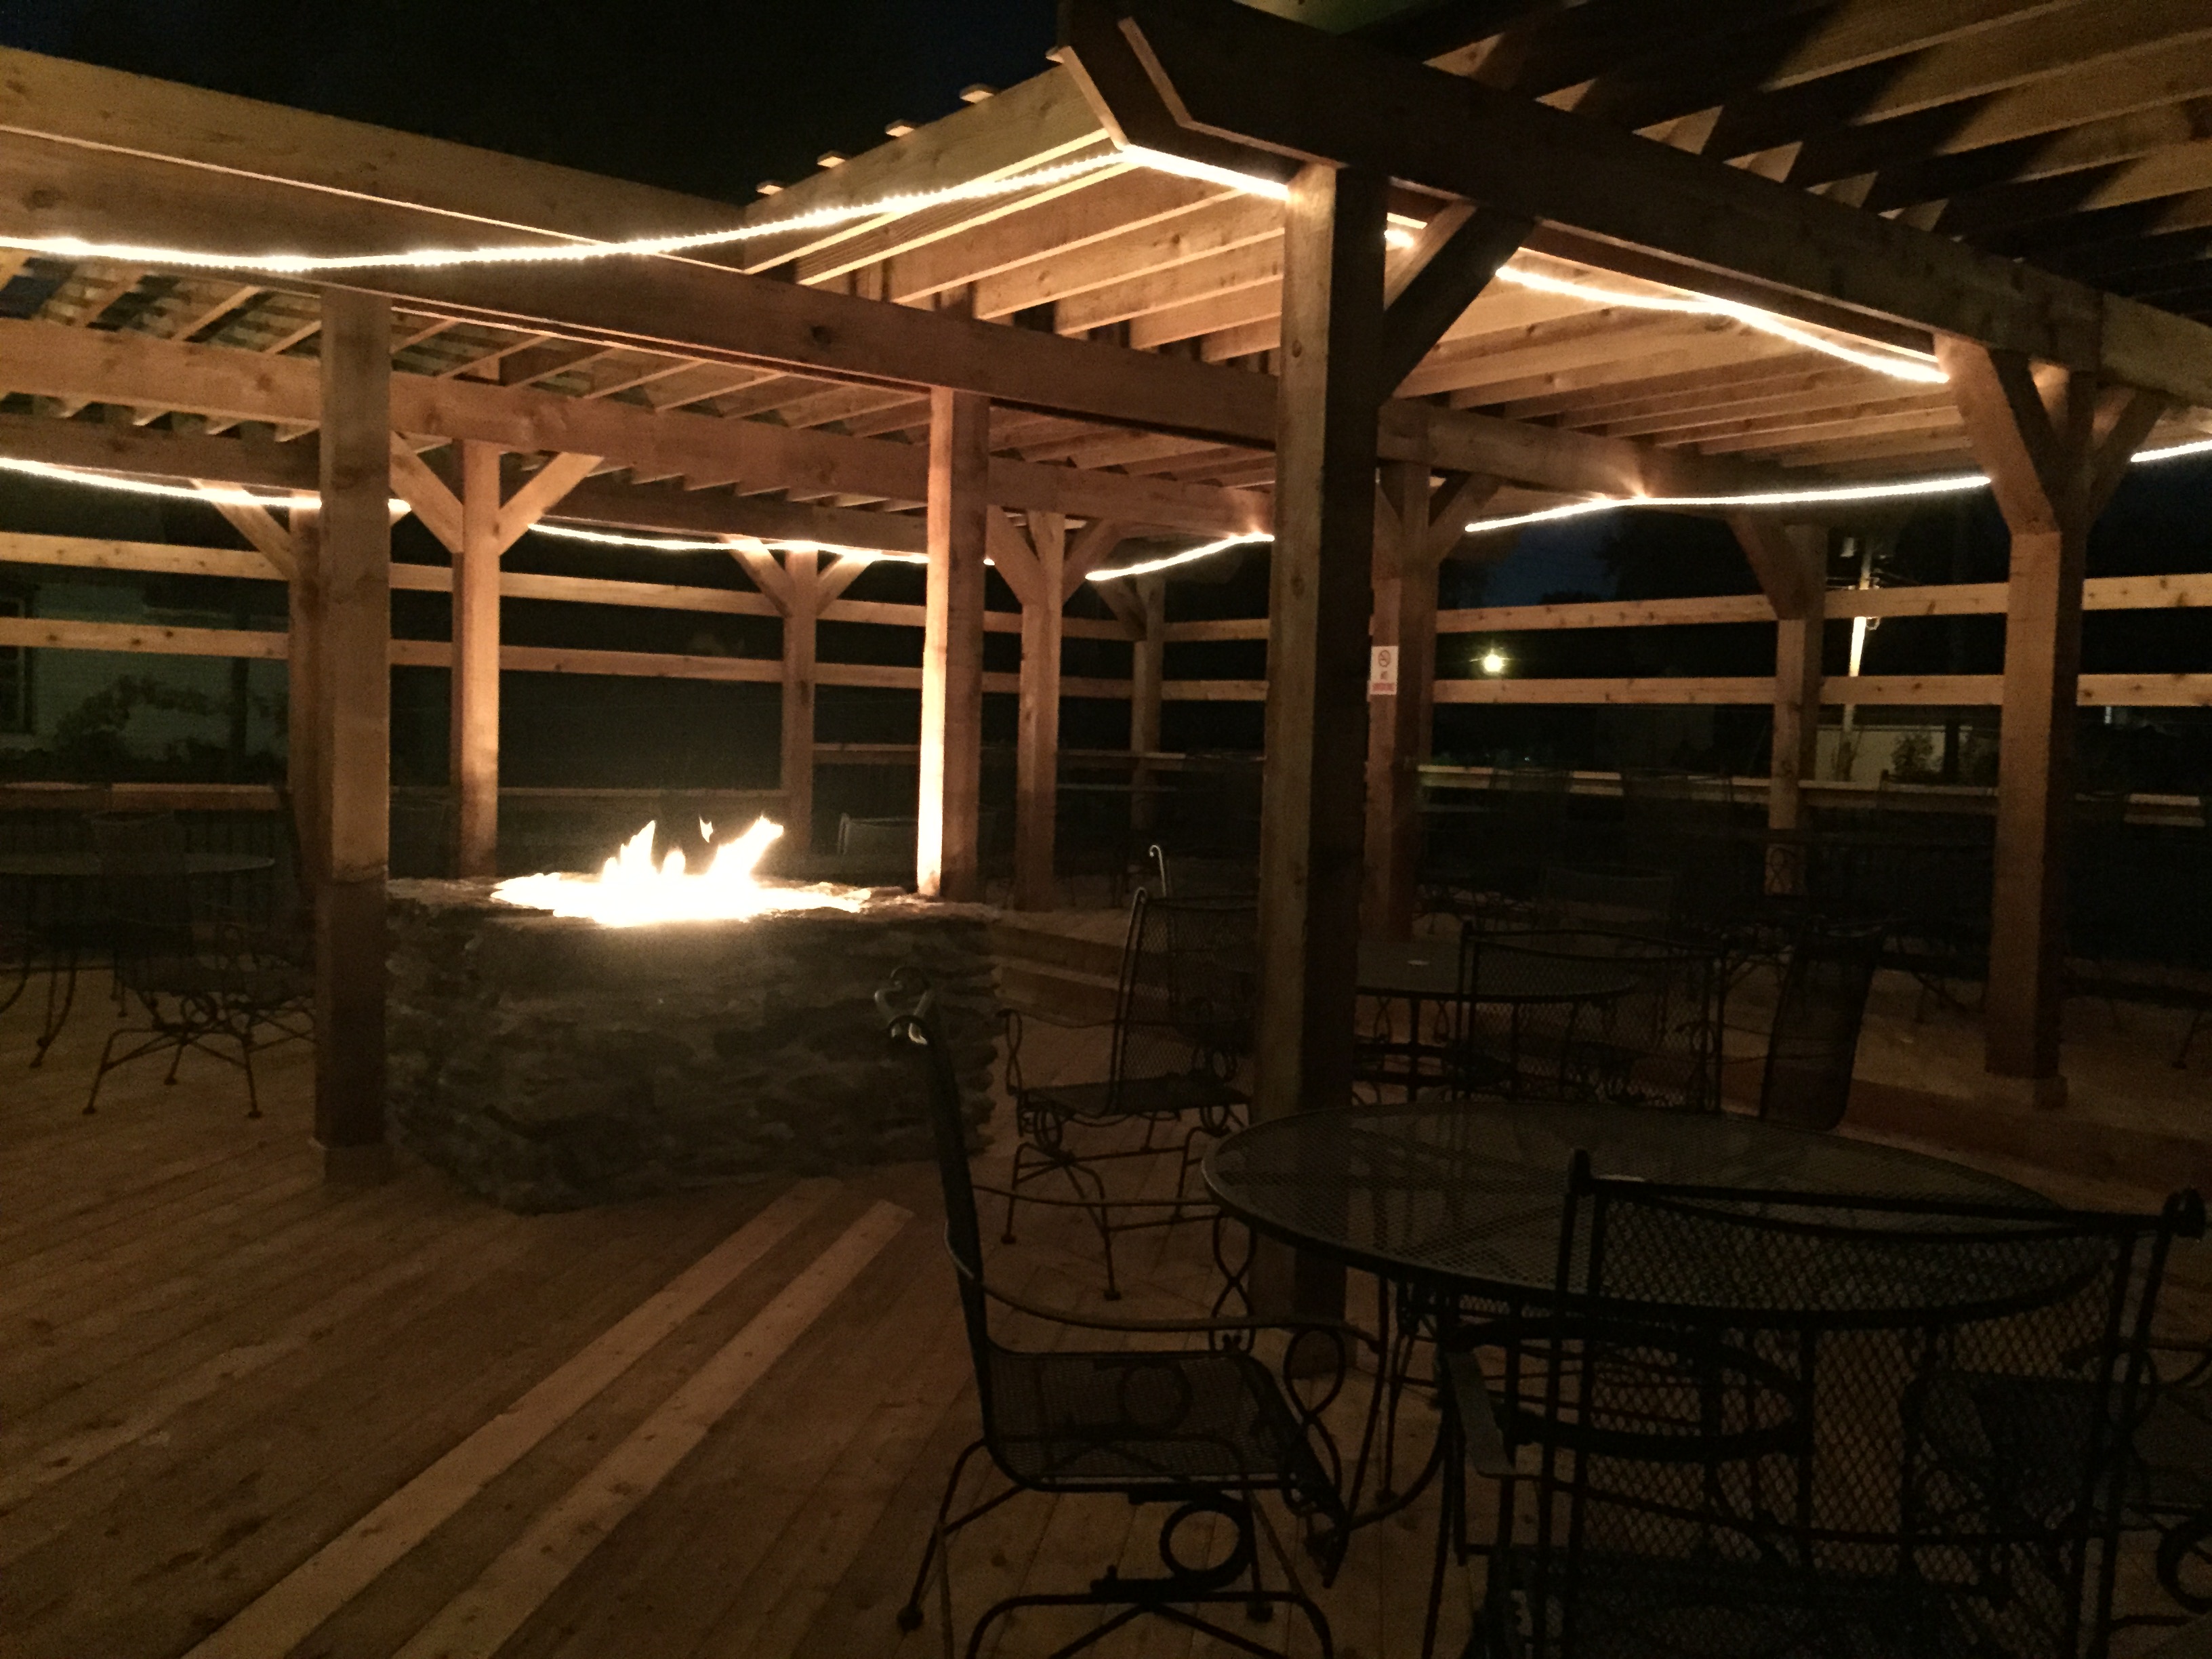 Grindstone Valley Winery - outdoor photo, nighttime. A wooden patio with a lit fire pit in the center.